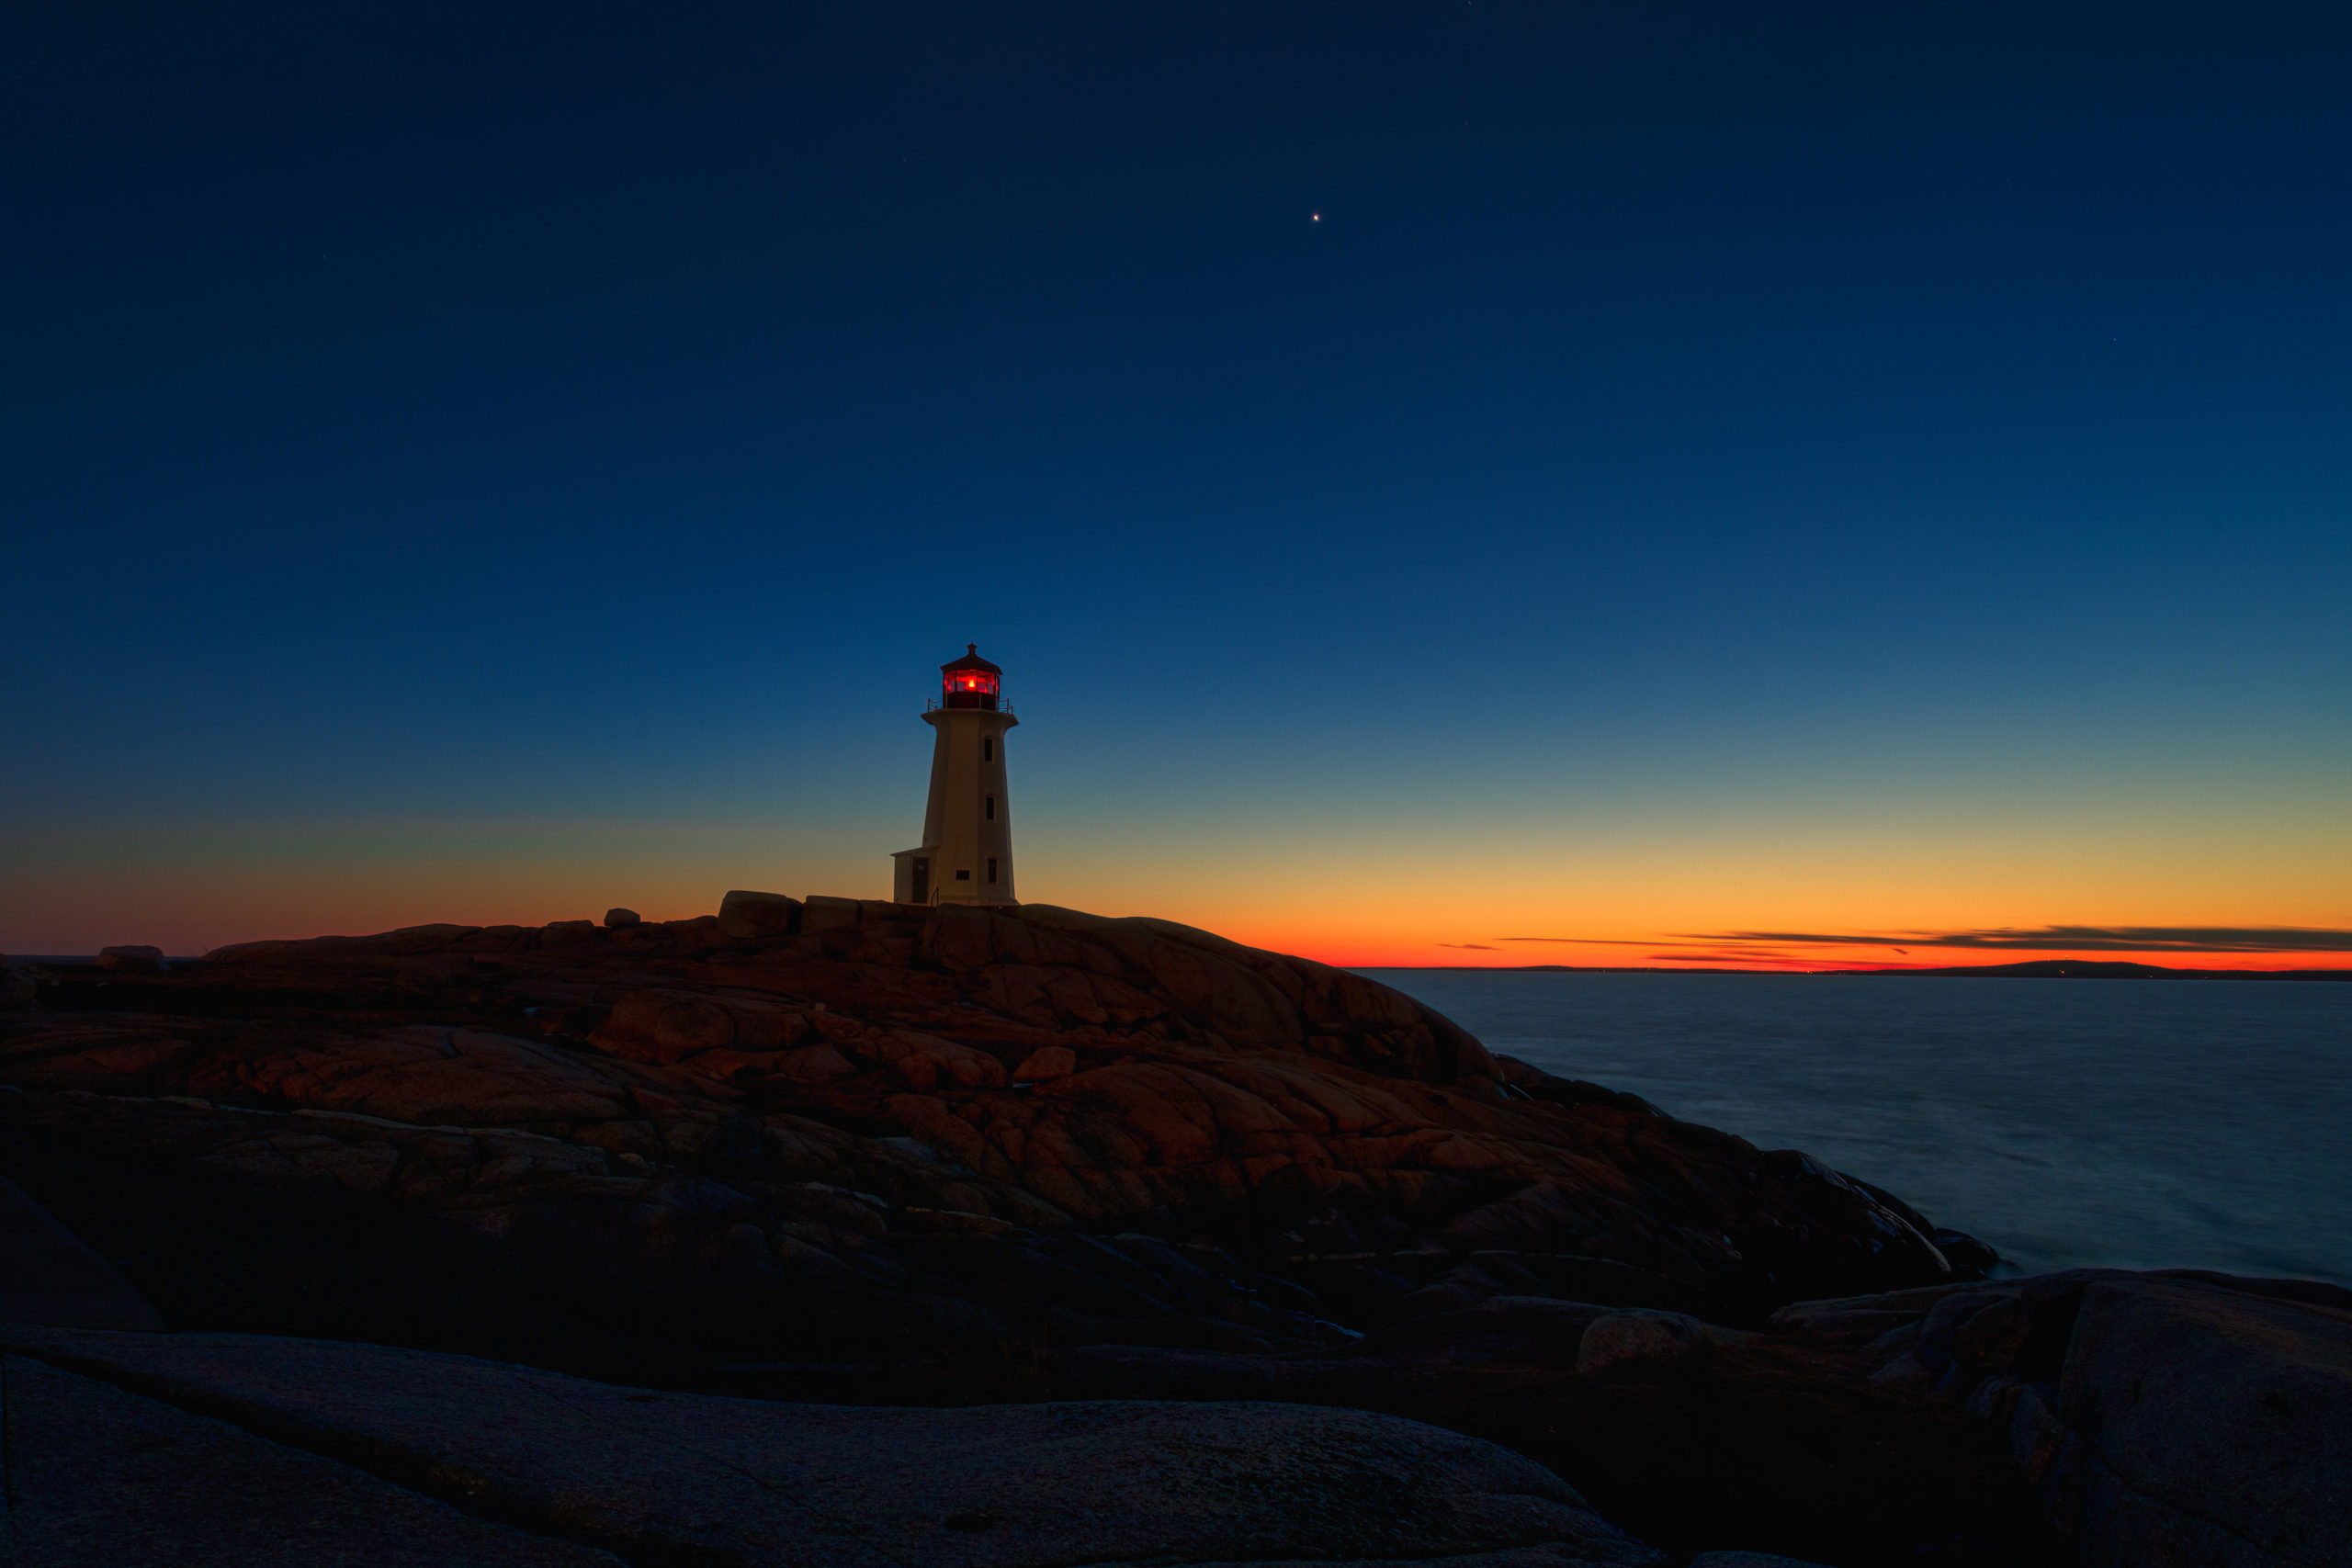 the most photographed lighthouse in North America is Peggys cove lighthouse